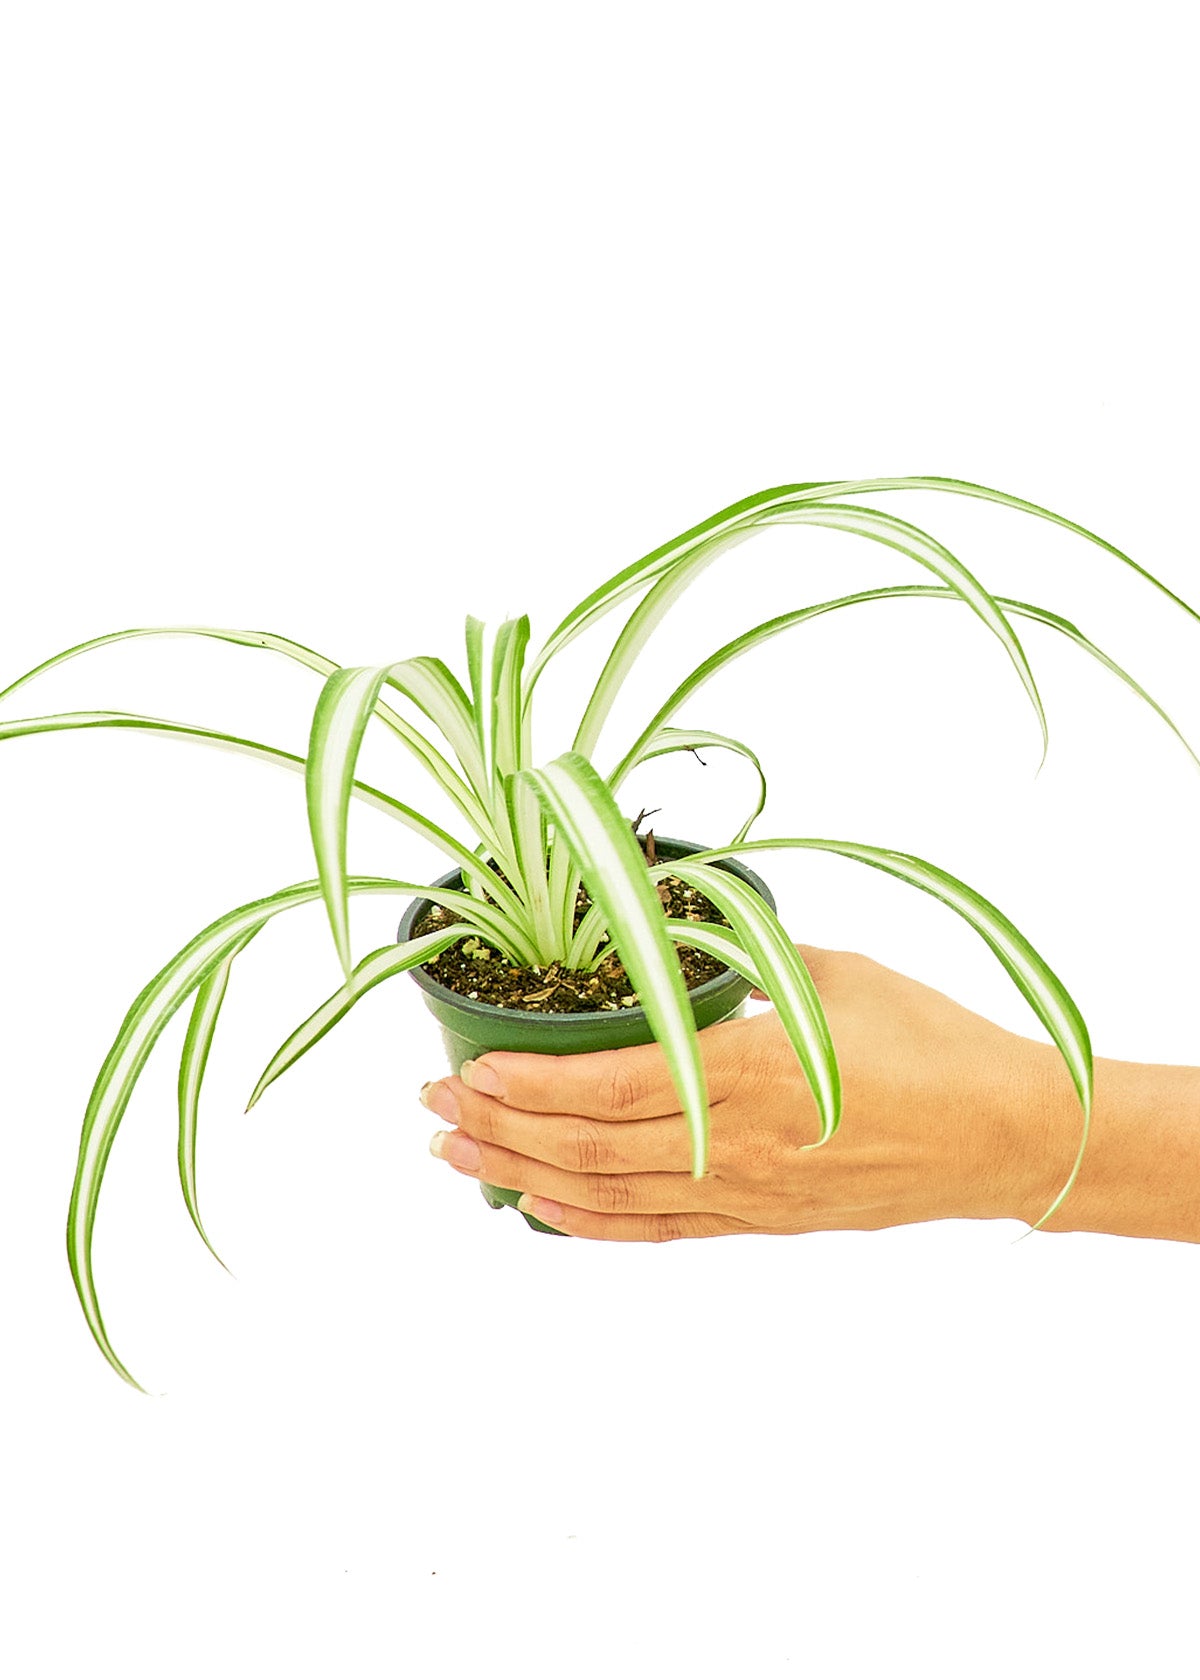 Small size Spider Plant in a growers pot with a white background and a hand holding the pot giving a top view